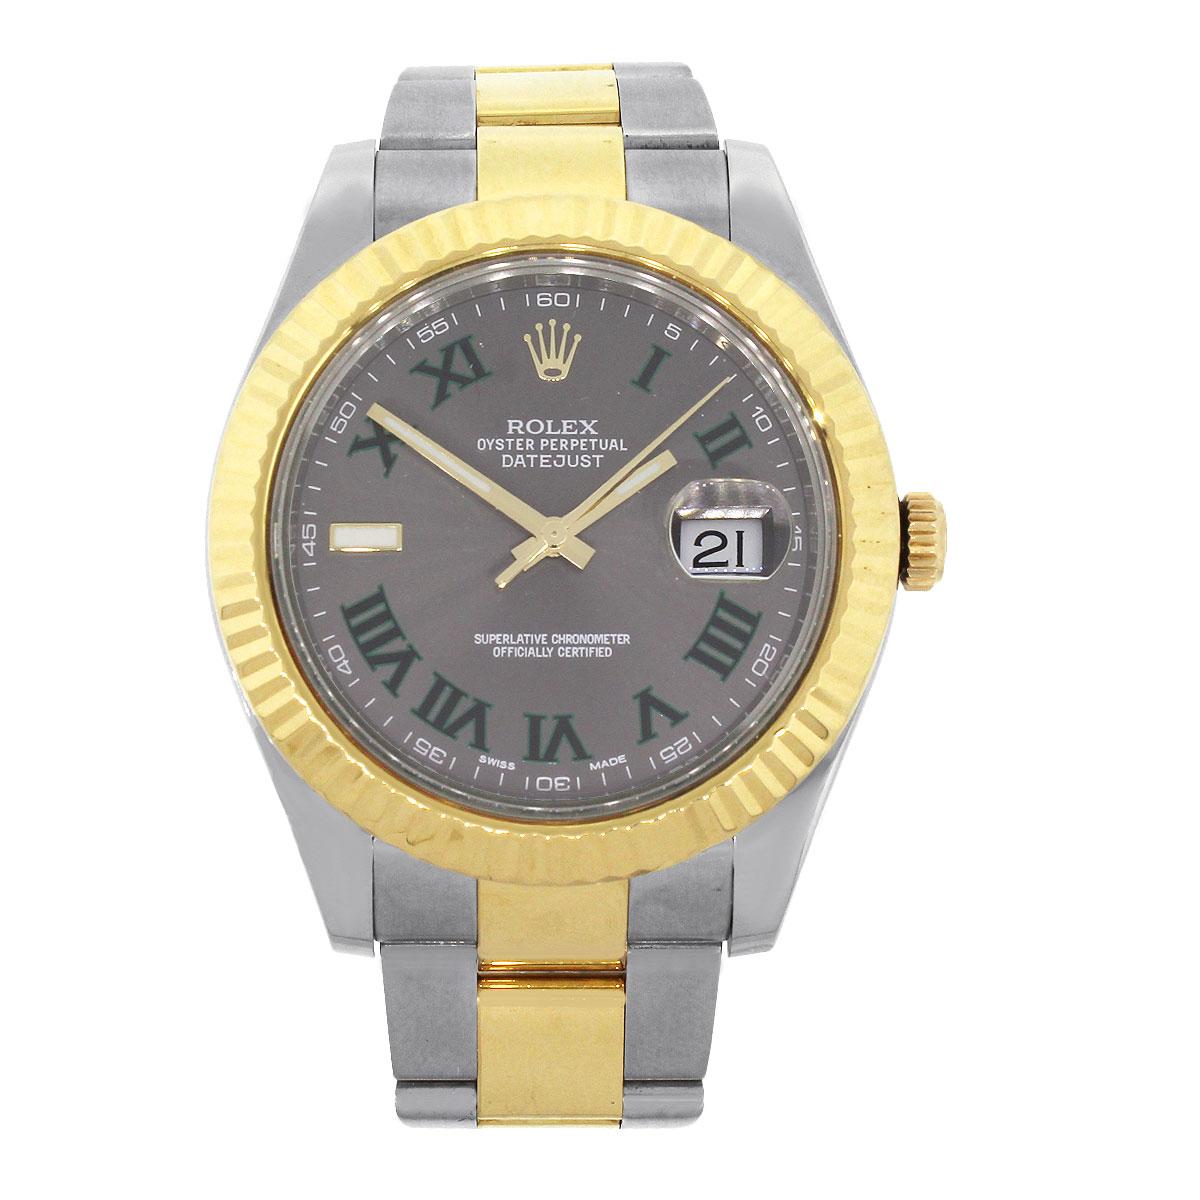 Brand: Rolex
MPN: 116333
Model: Datejust II
Case Material: Stainless Steel
Case Diameter: 41mm
Crystal: Scratch resistant sapphire
Bezel: 18k Yellow Gold Fluted Bezel
Dial: Gray dial with green roman numerals and gold hands. Date can be found at 3